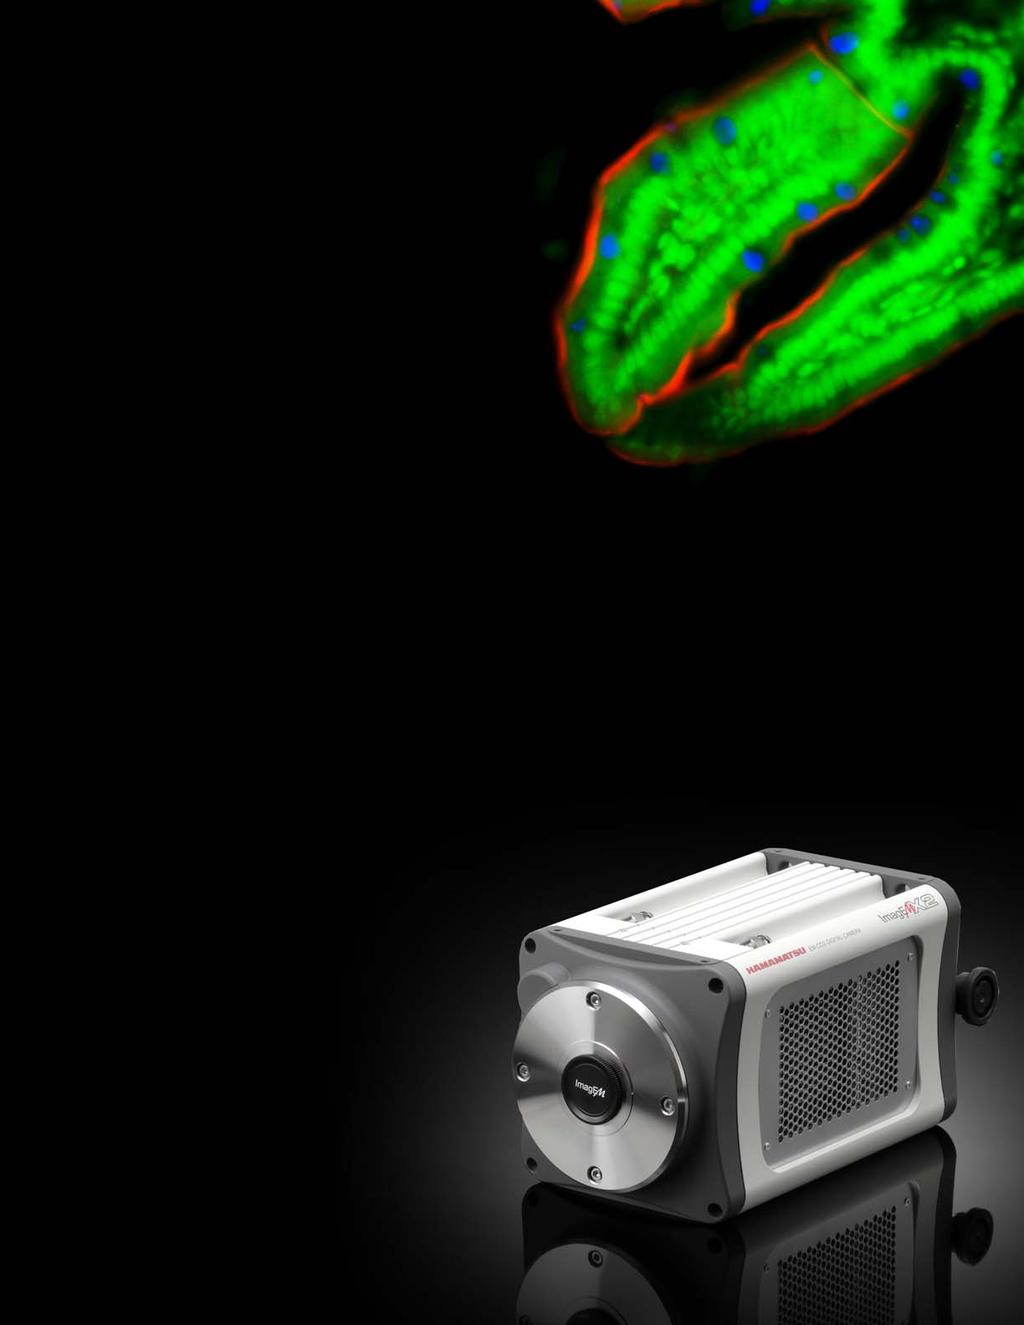 Electron Multiplying CCD Camera Multiply faster R The ImagEM X2 is an extremely versatile camera that quietly delivers 70 frames/s at full frame and up to 1076 frames/s with analog binning and